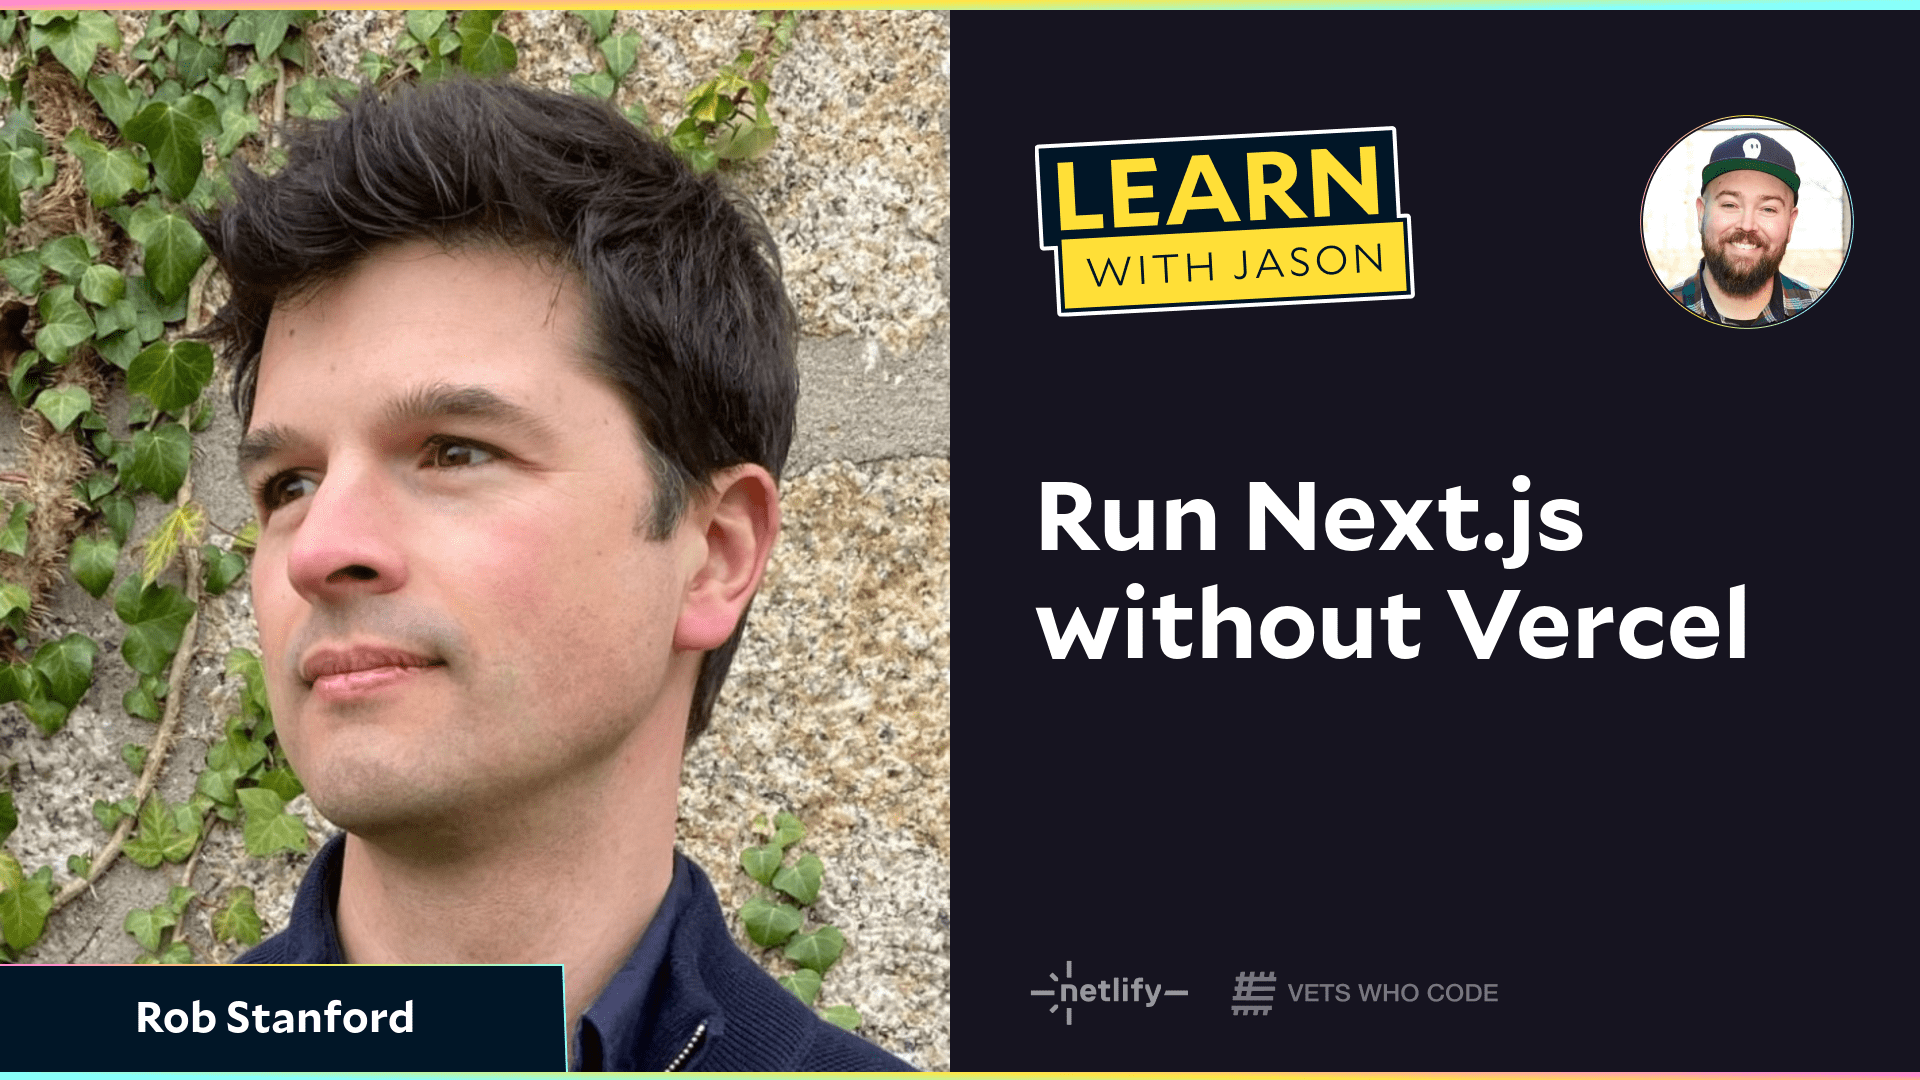 Run Next.js without Vercel (with Rob Stanford)